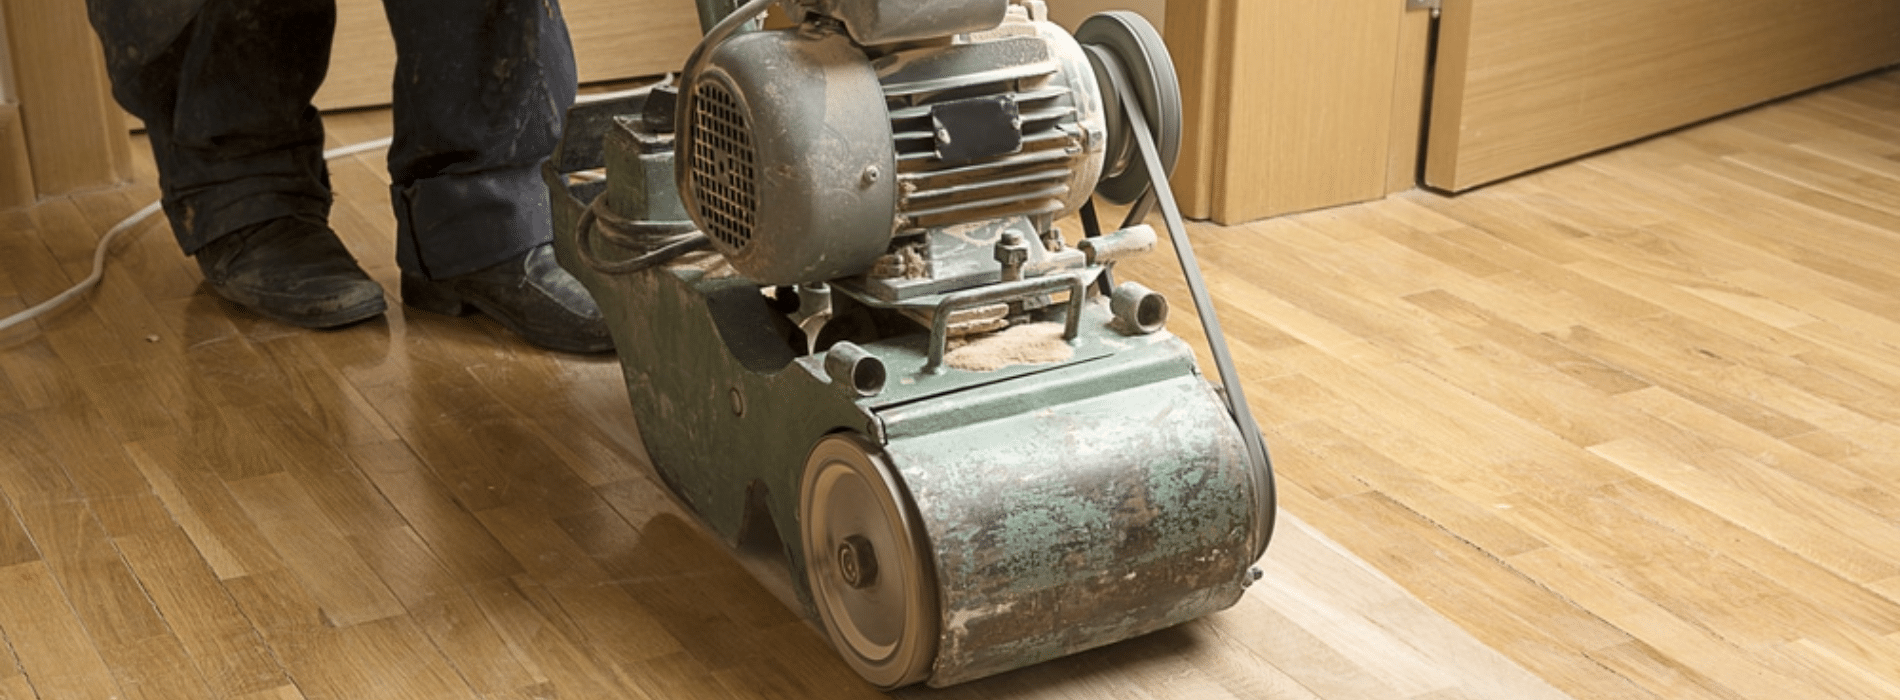 Mr Sander® are using a Bona Scorpion, a 220 mm dimension drum sander with 1.5 kW power, 230 V voltage, and 50 Hz frequency in Liverpool Street, EC2. It is connected to a dust extraction system with a HEPA filter, ensuring a clean and efficient sanding process for parquet floors.